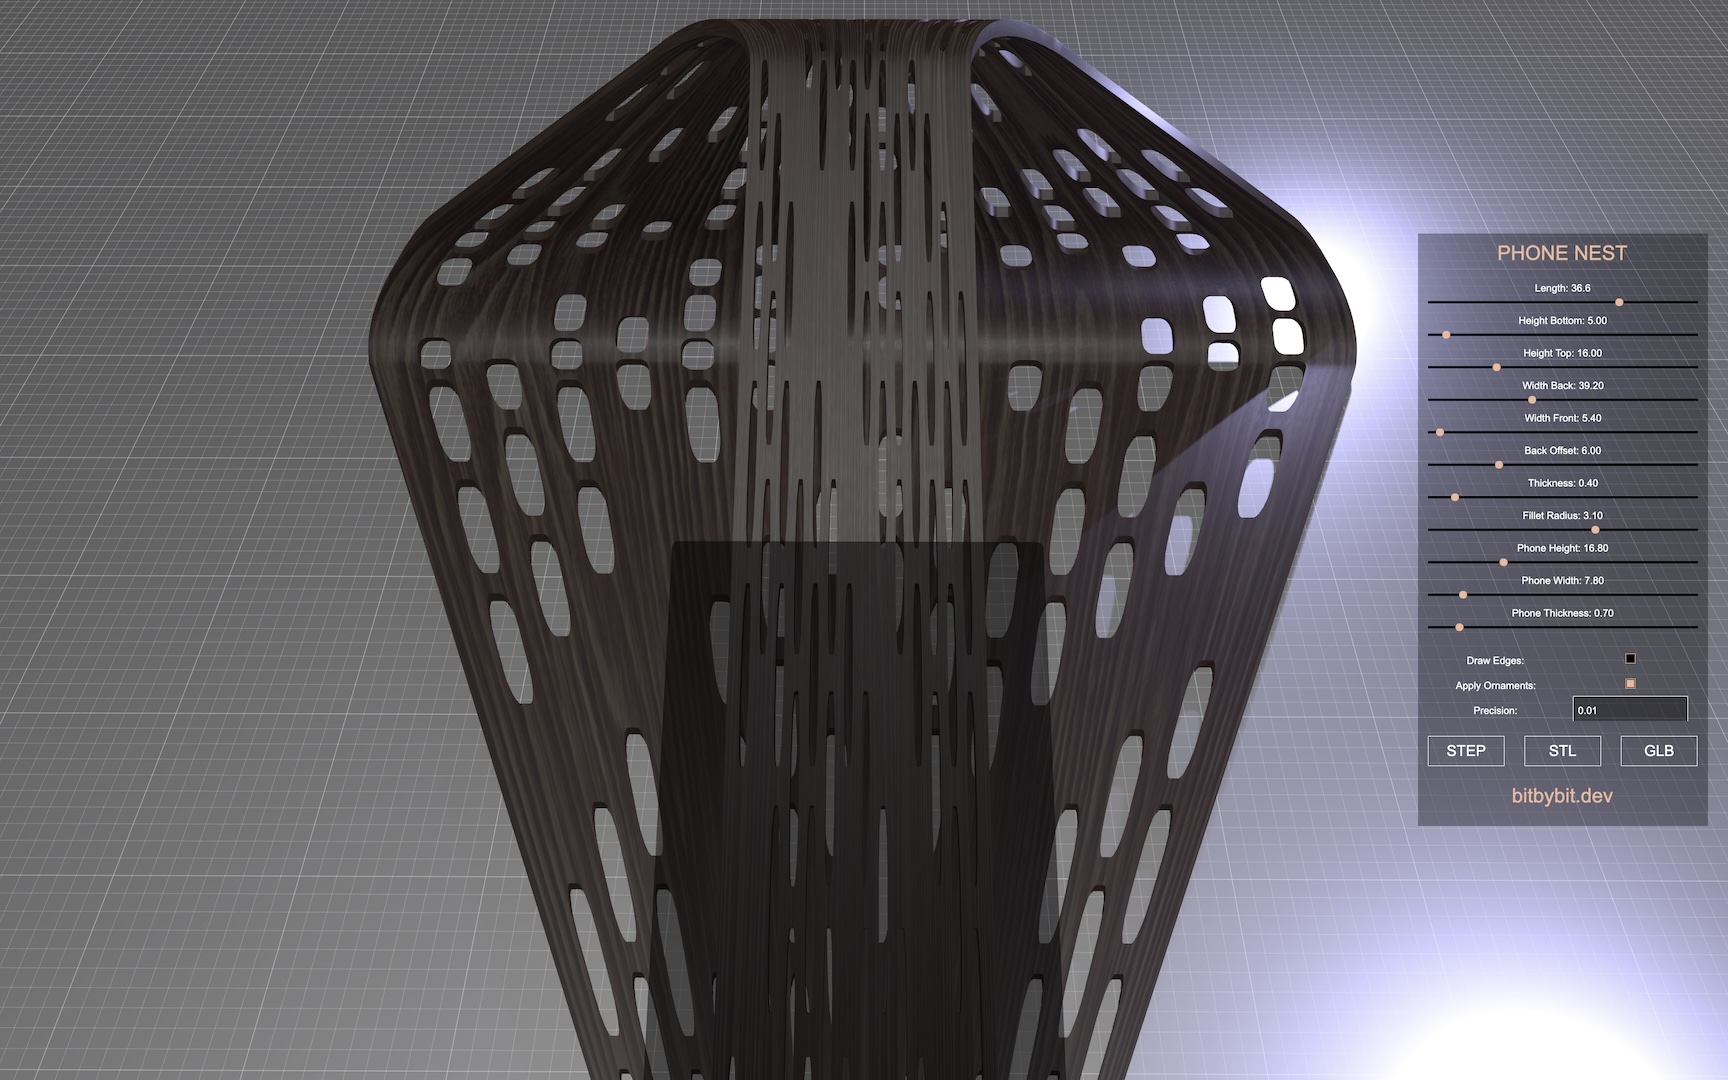 The phone nest holder 3D model top close up view picture of wide back dimension